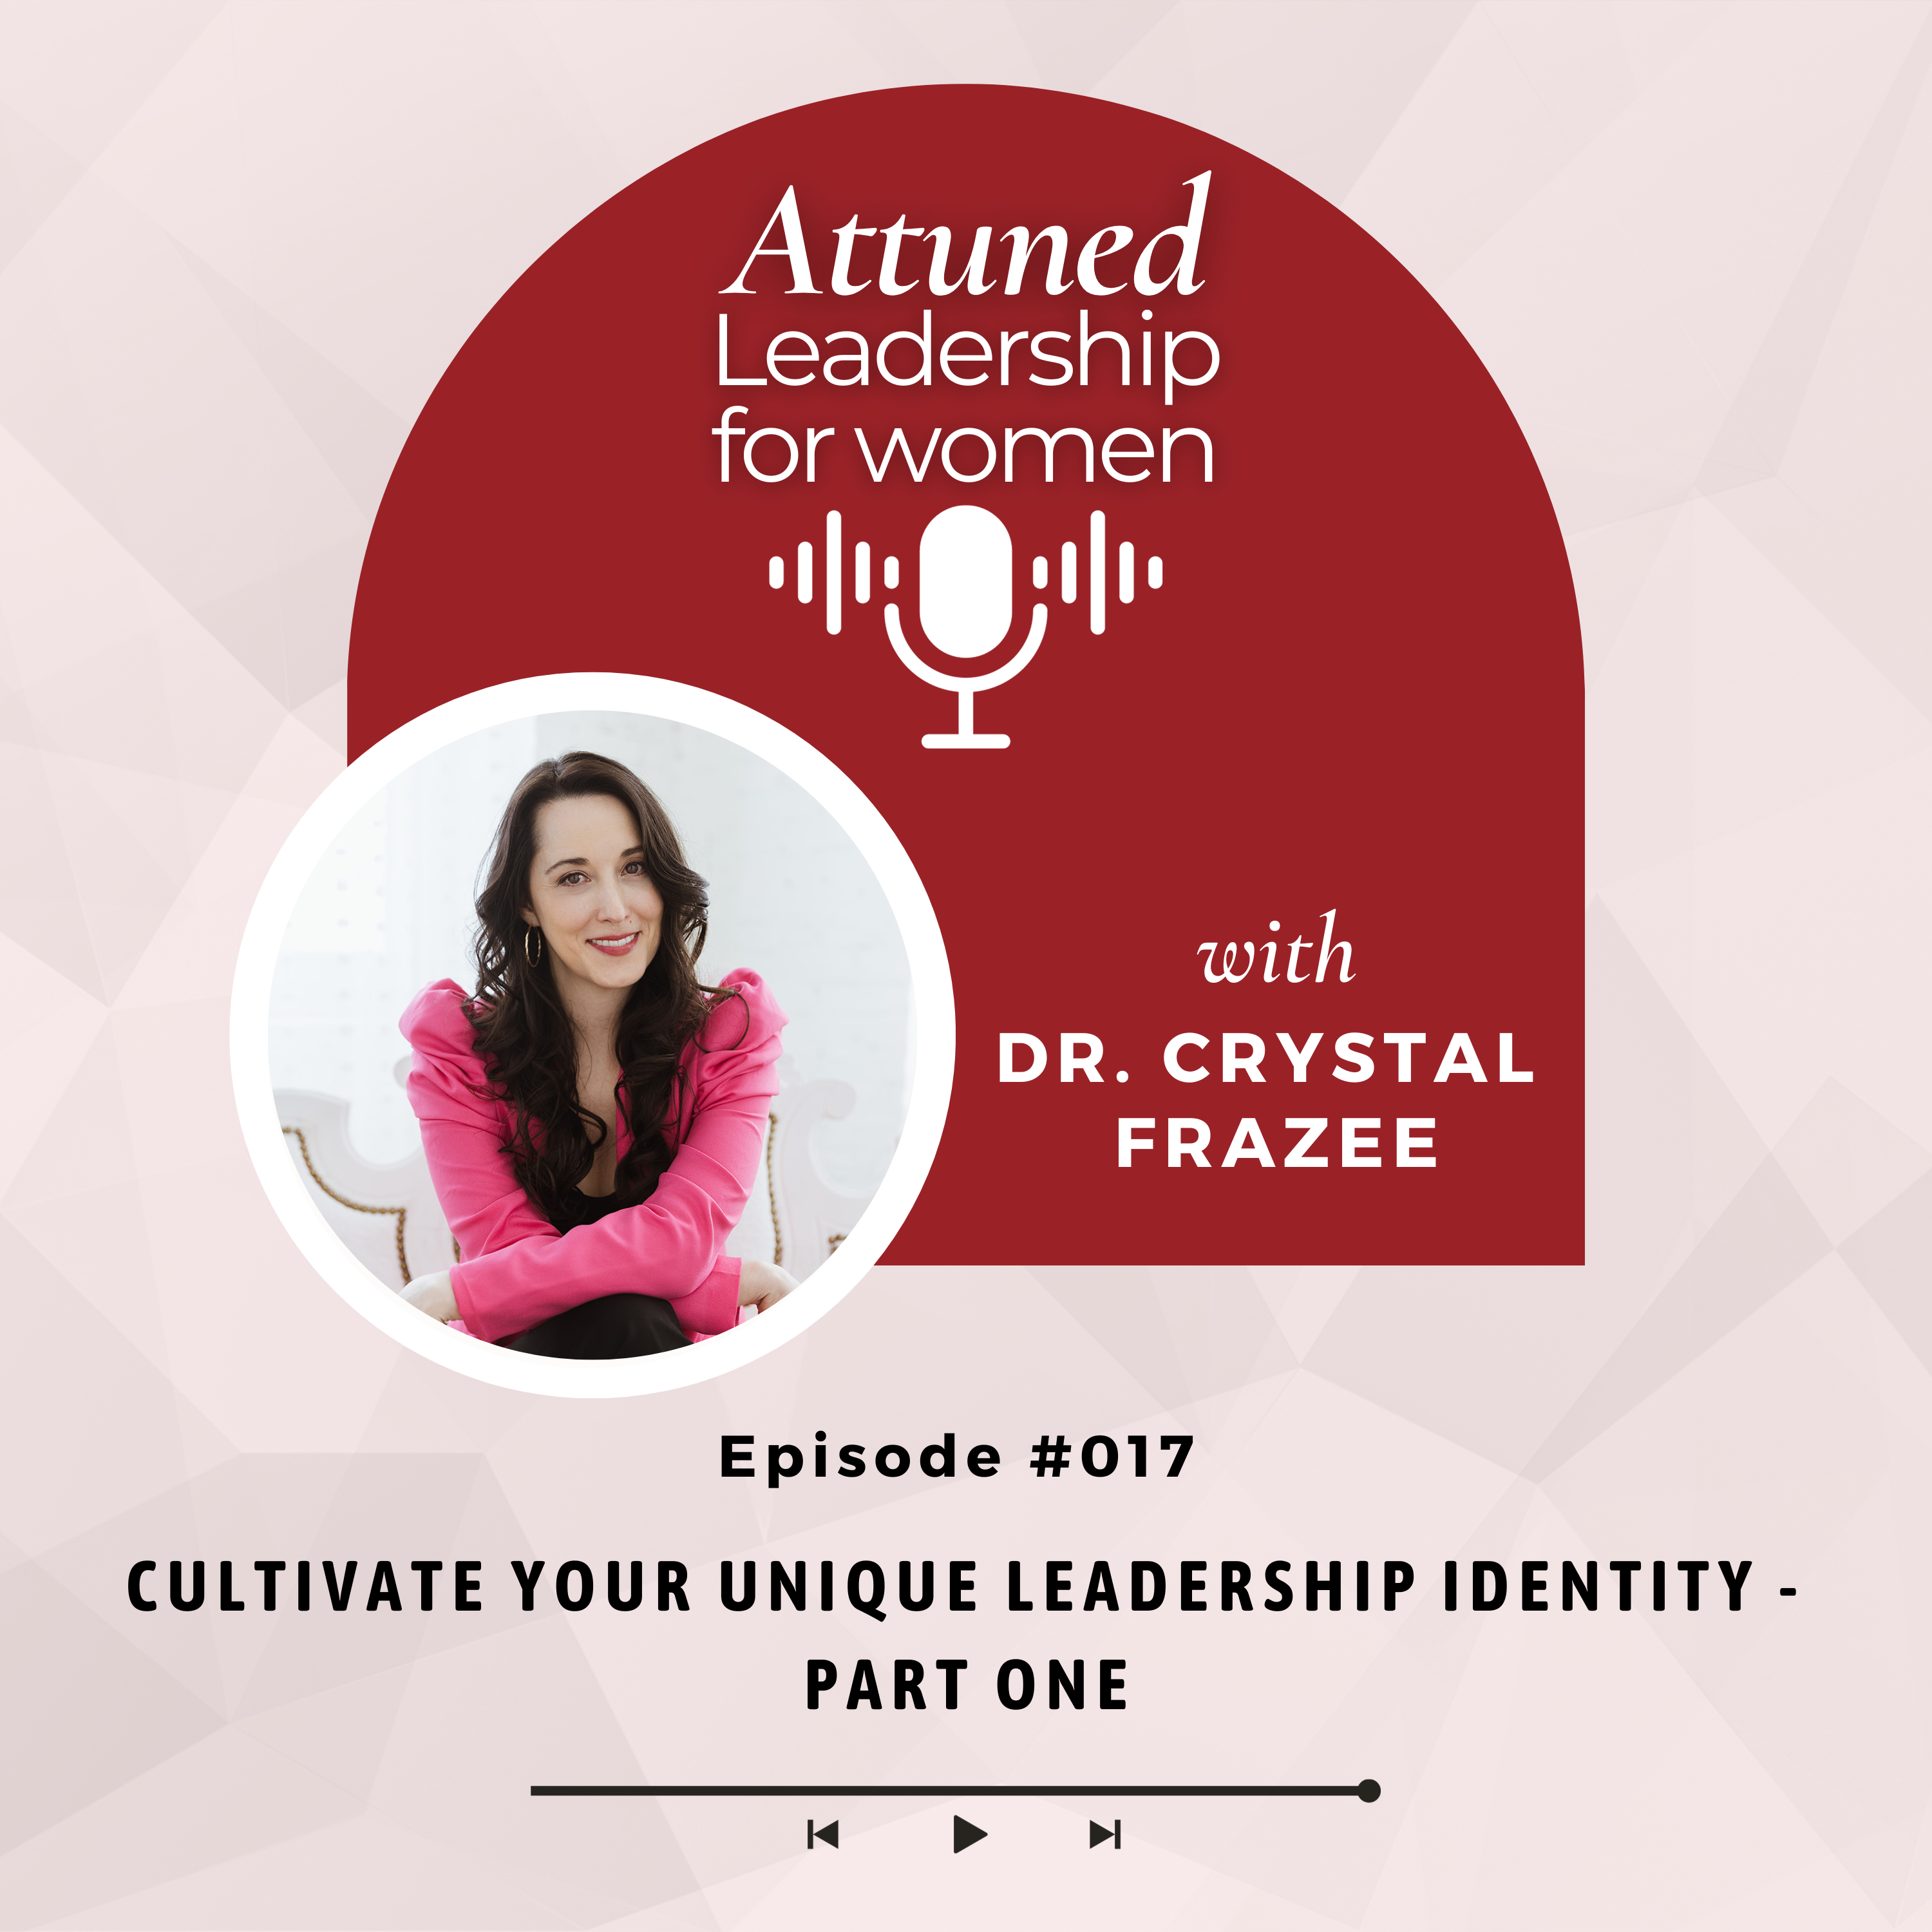 Dr. Crystal Frazee on Stress Resilience for Women Leaders